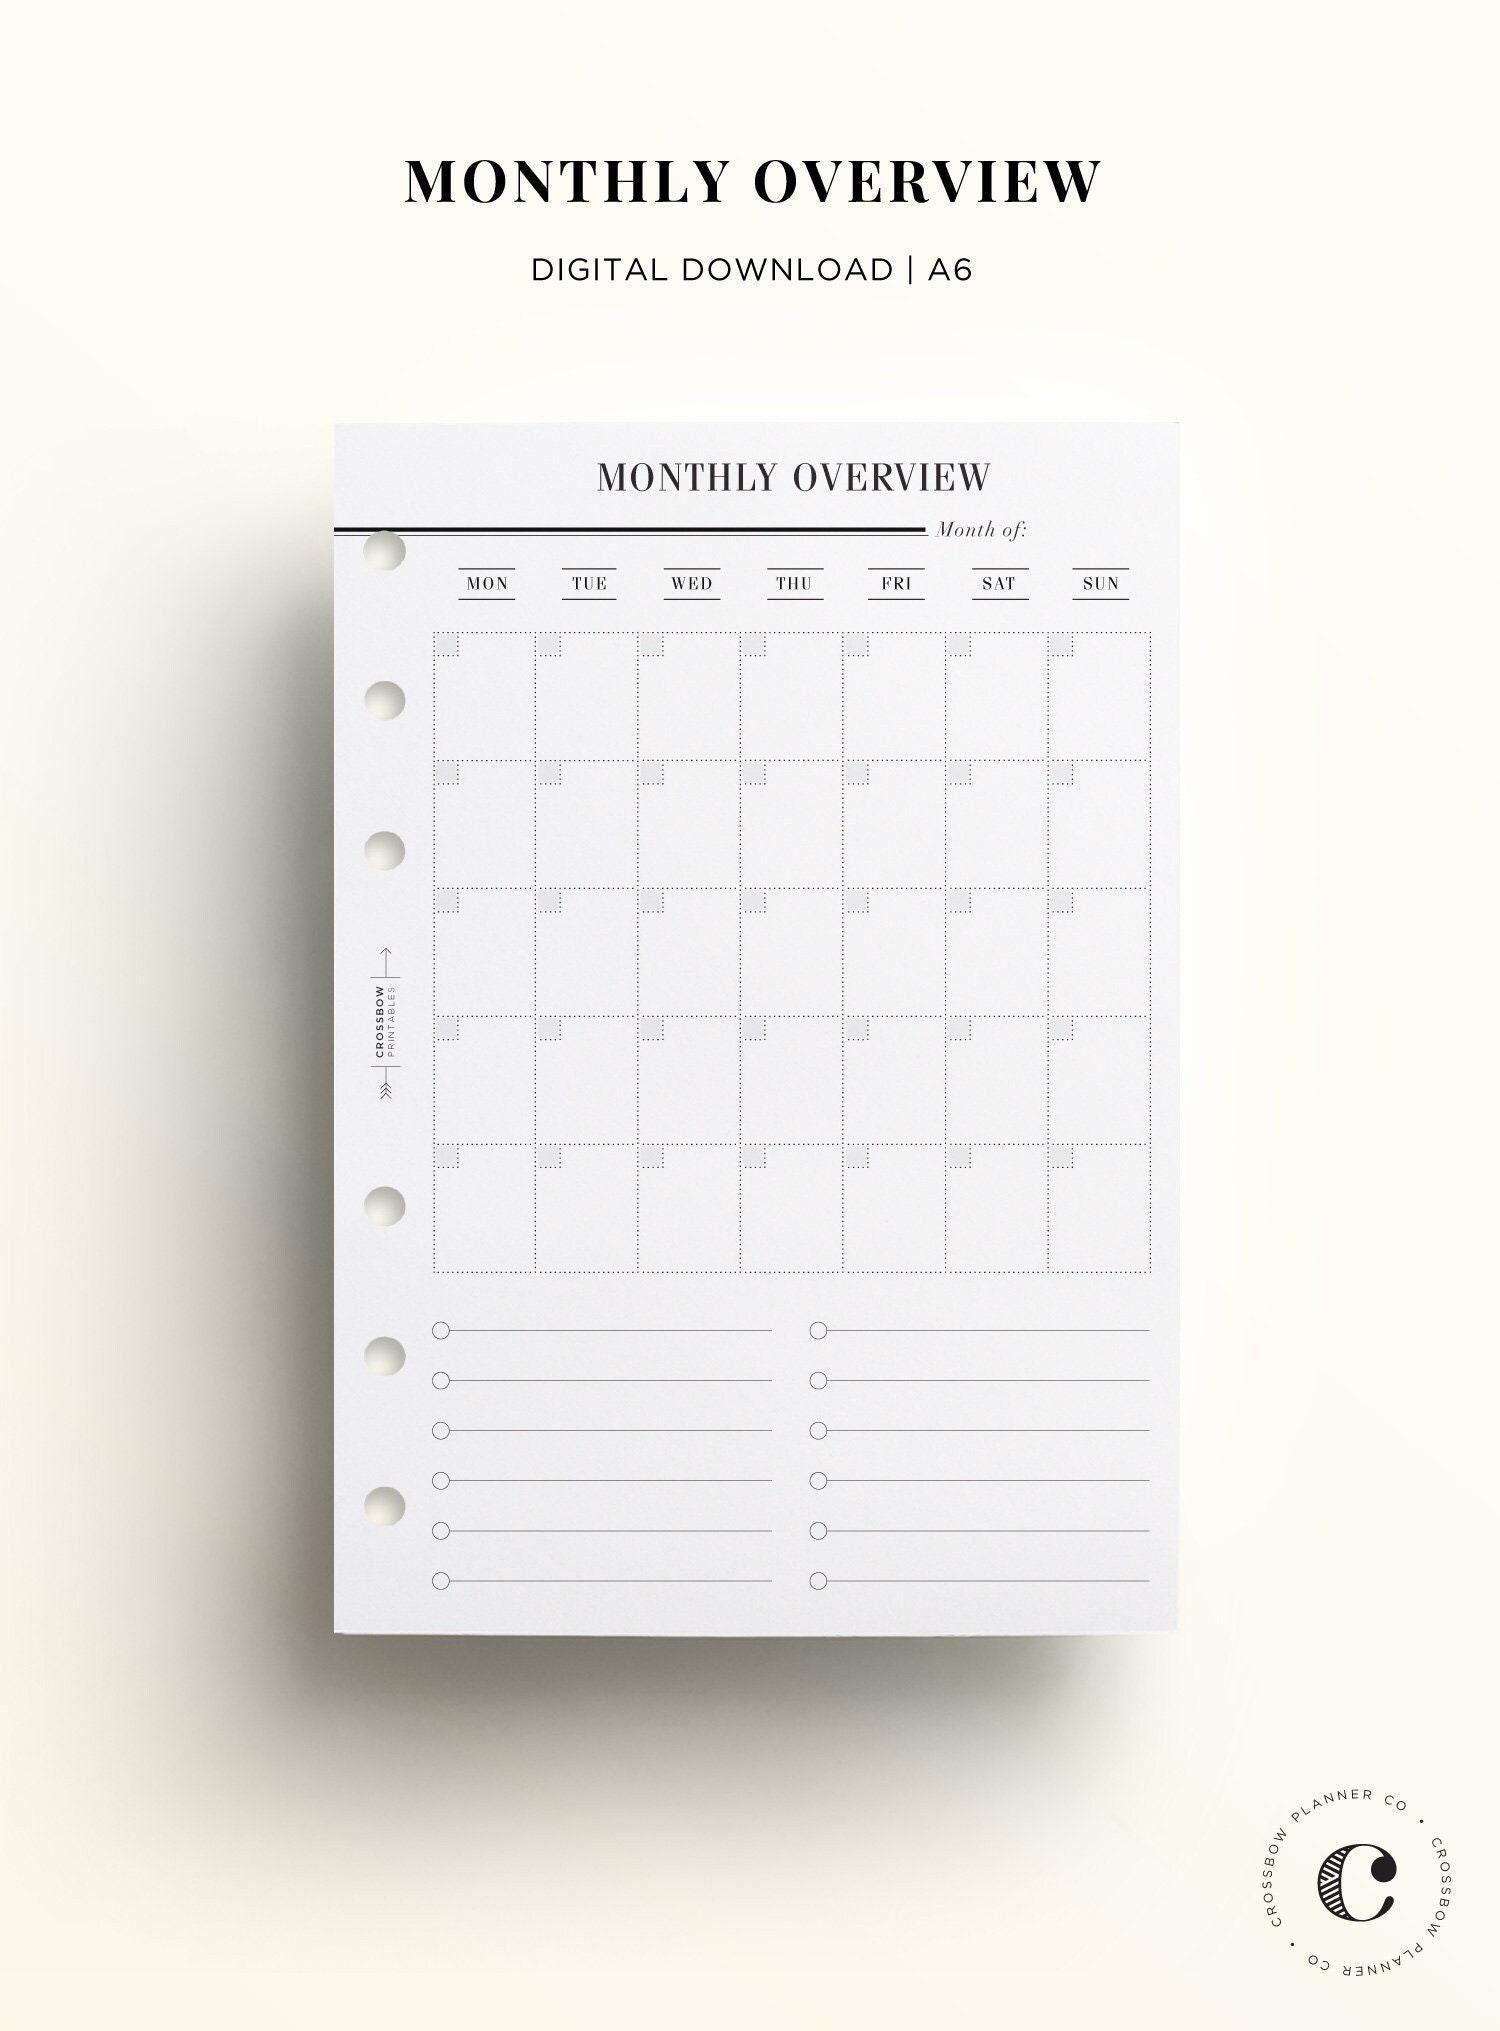 Important Dates Printable A6 Inserts: Minimal Ring Printables